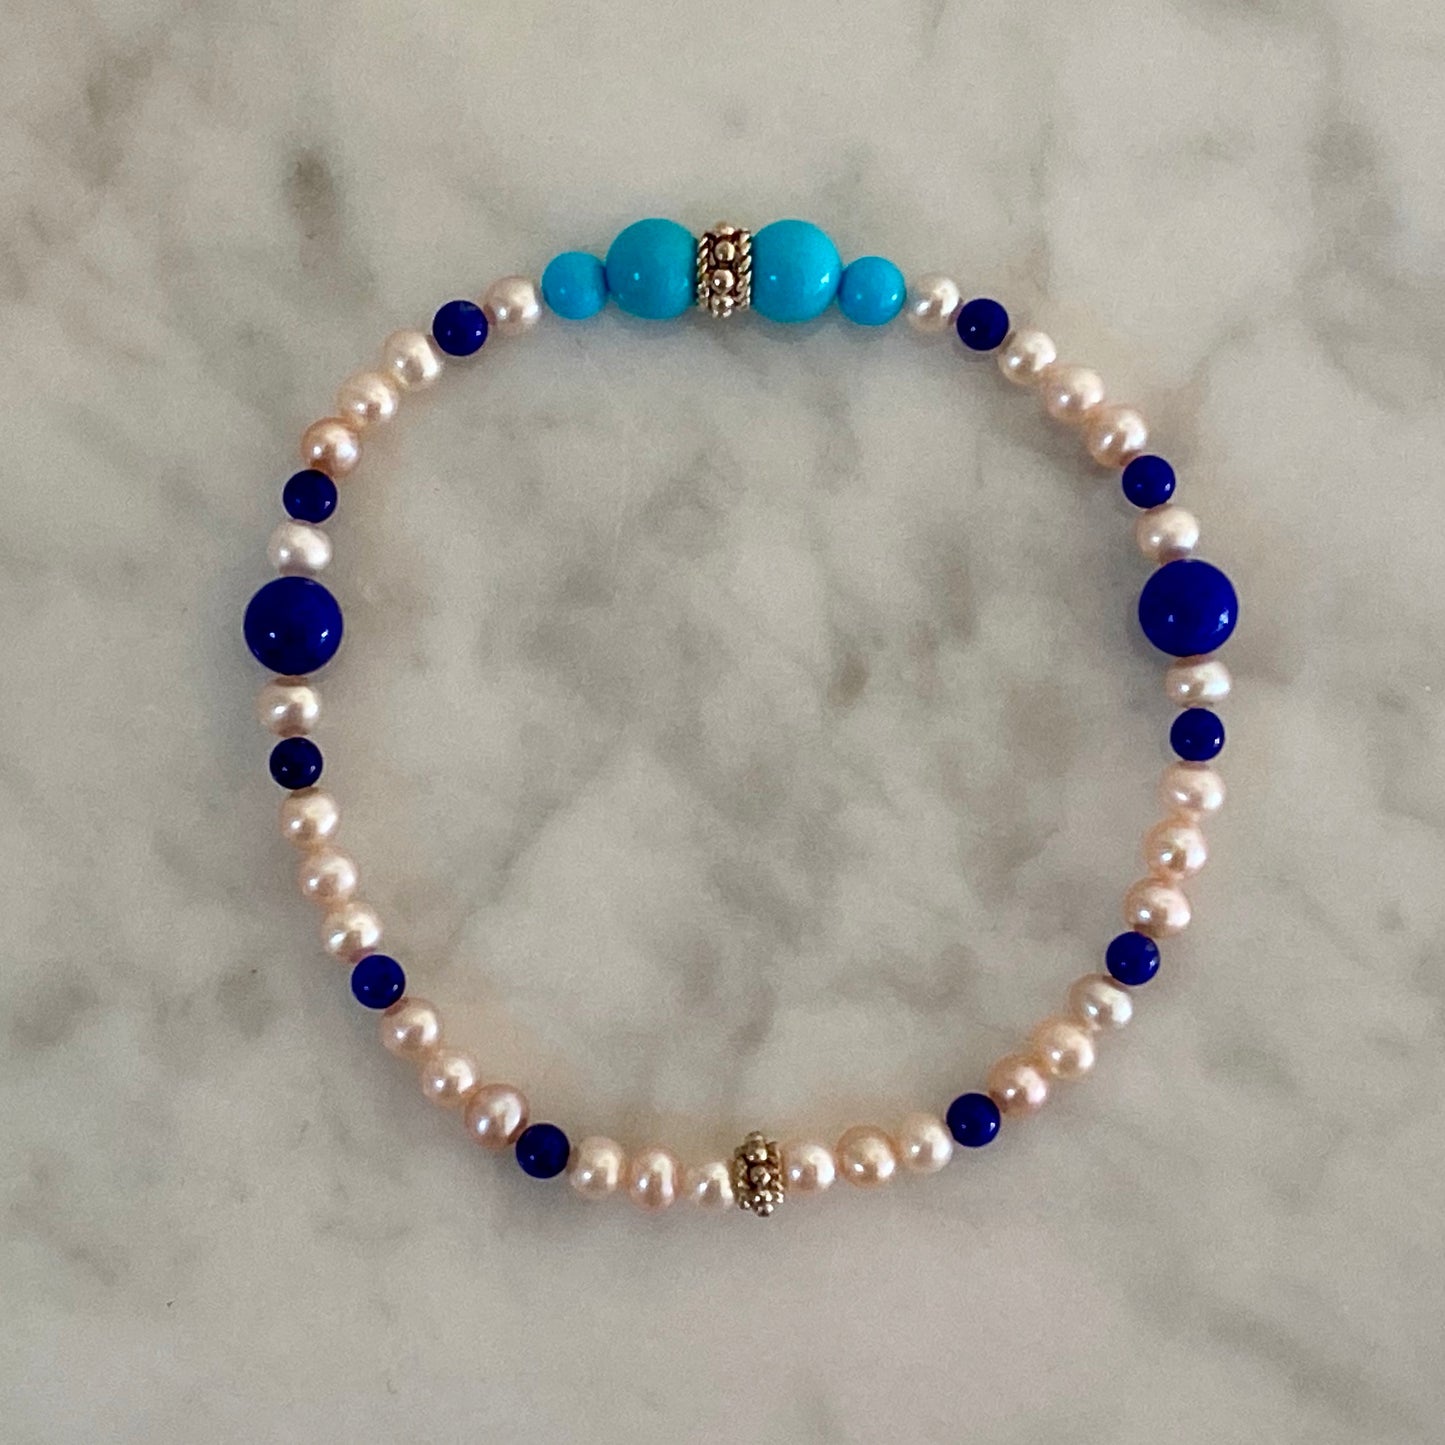 7" Stretch Bracelet with Natural Sleeping Beauty Turquoise and Lapis Lazuli Beads, Natural Pastel Color Cultured Freshwater Pearls, and Handmade Sterling Silver Bali-Style Beads